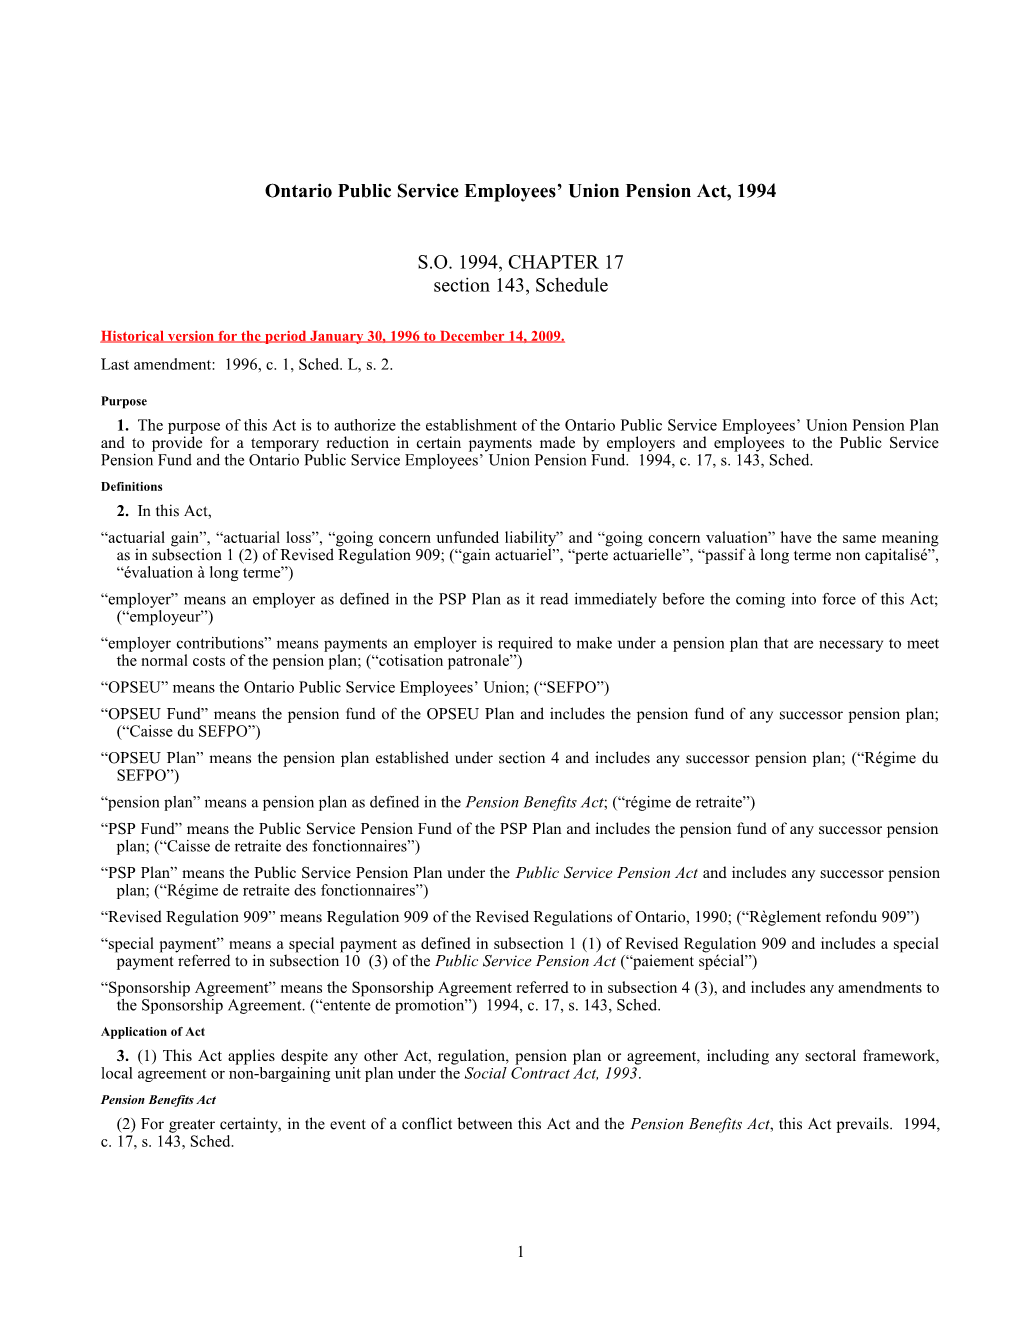 Ontario Public Service Employees' Union Pension Act, 1994, S.O. 1994, C. 17, S. 143, Sched